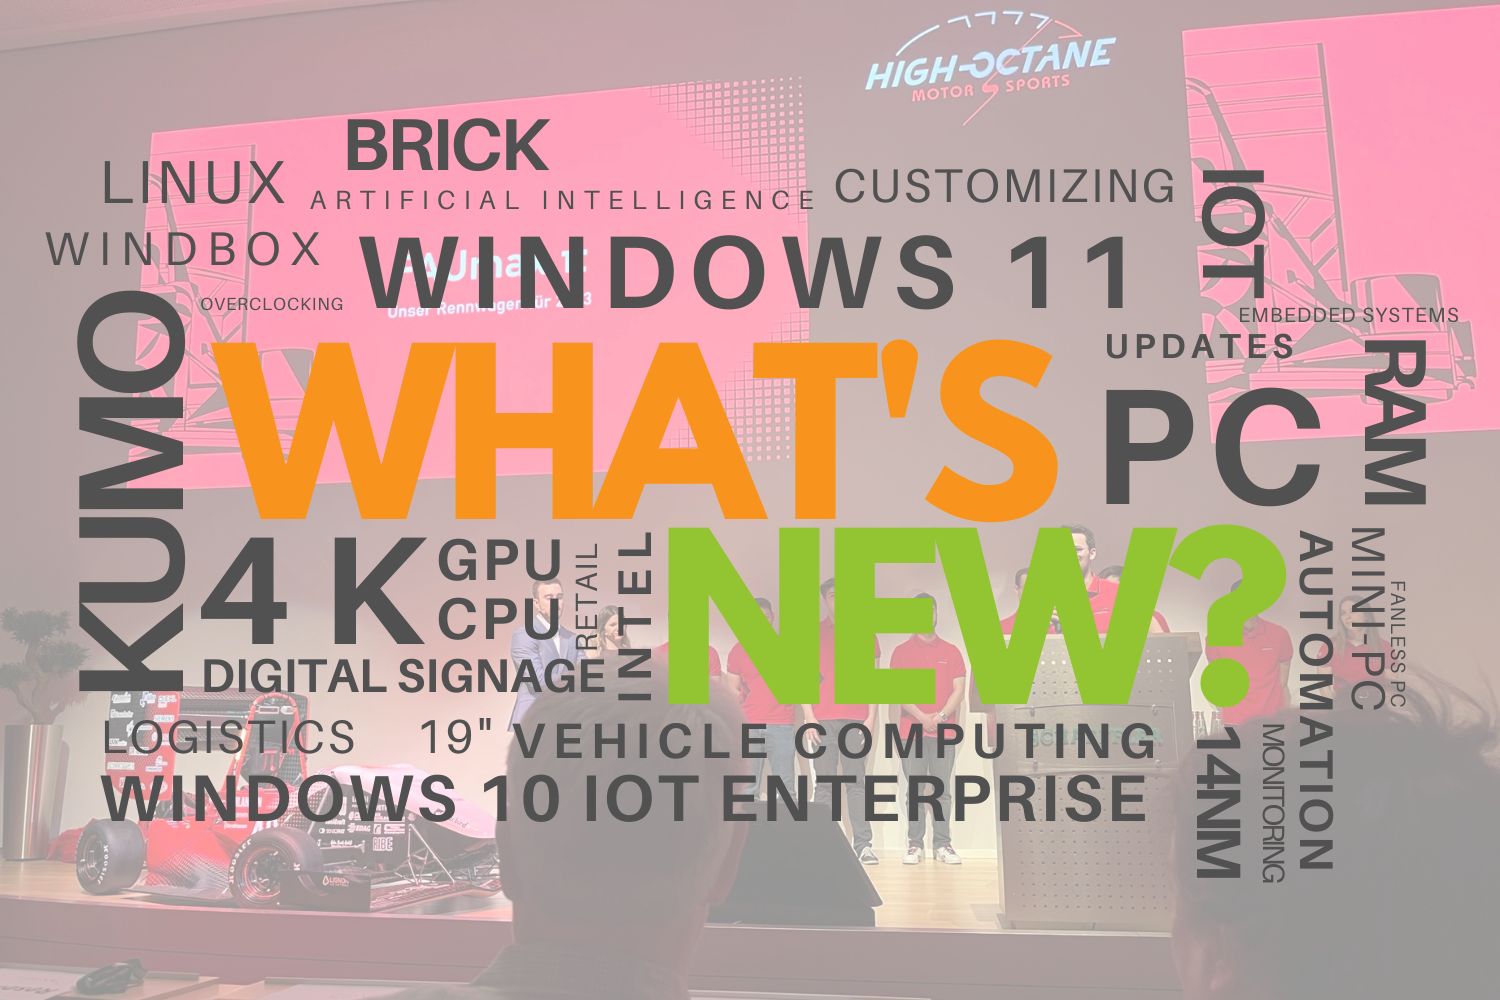 What’s new? Octanes Rollout, ISO-Zertifikat und Teambuilding 